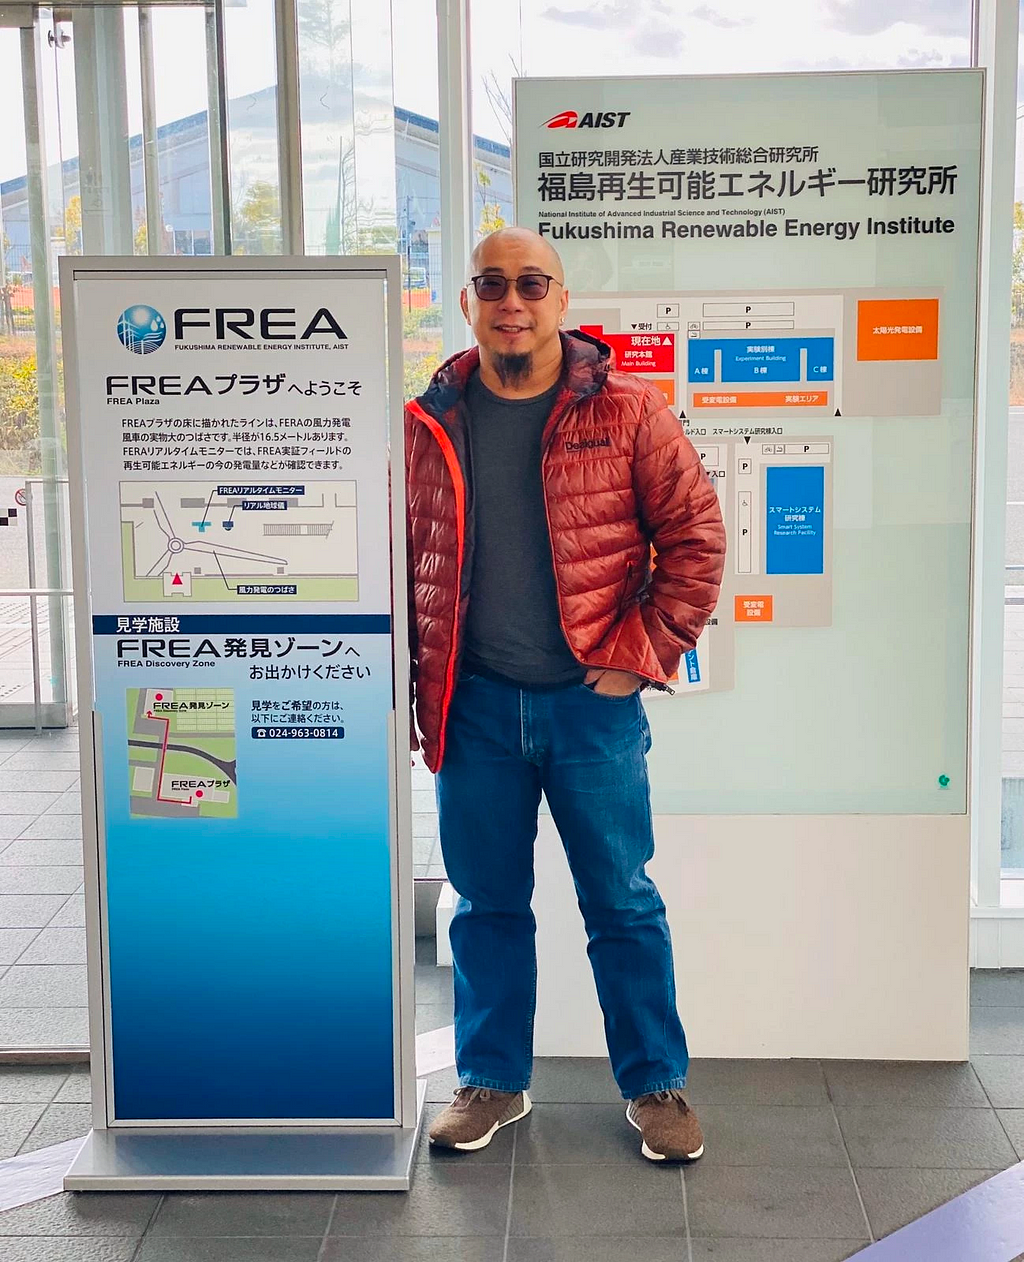 Martin visits FREA, Japan’s leading research institute dedicated to renewable energy